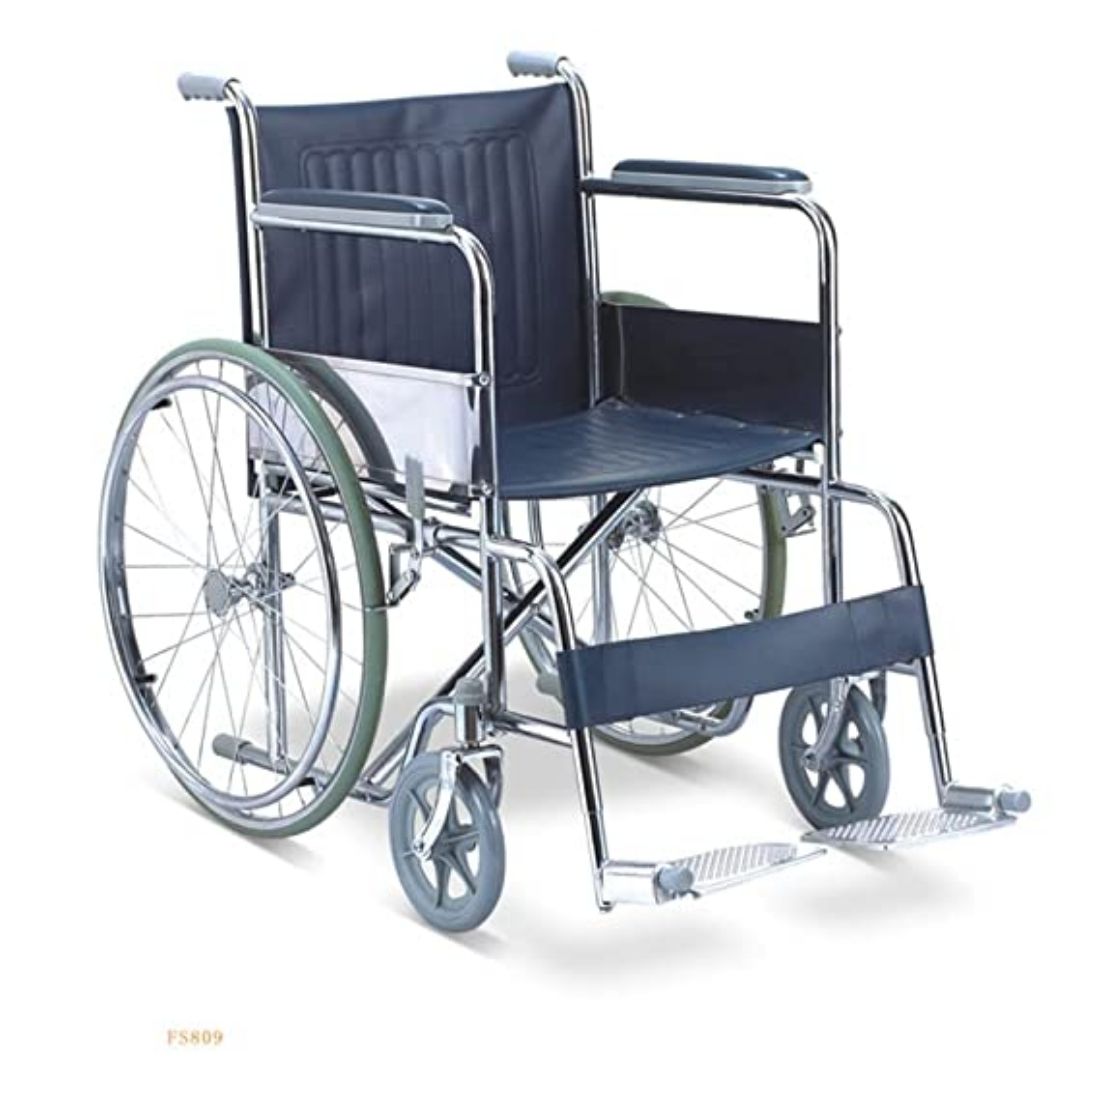 Buy Foldable Wheel Chairs has manual foldable chair designed to make lives of disabled old age people/patients